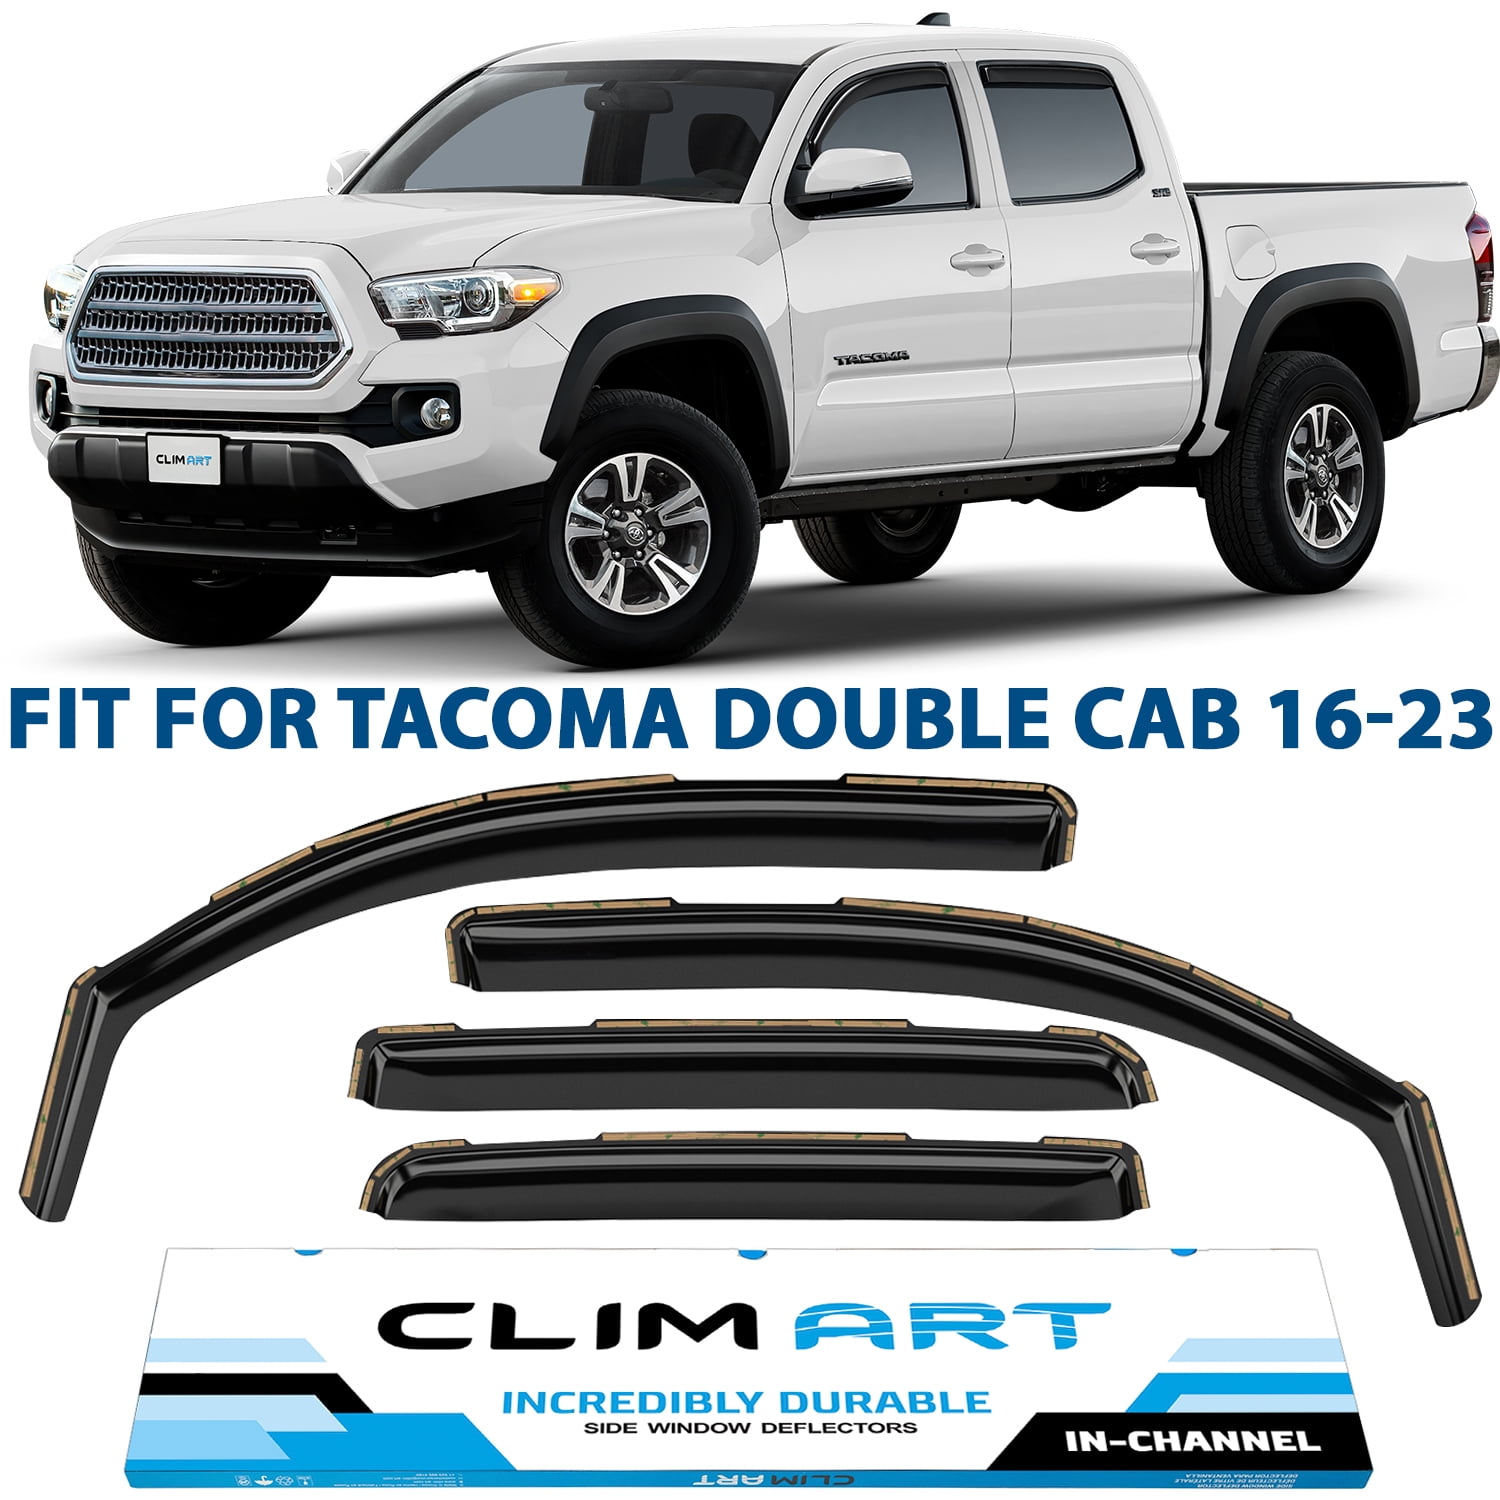 CLIM ART in-Channel Incredibly Durable Rain Guards for Toyota Tacoma  2016-2023 Double Cab, Truck Accessories, Vent Window Visors, Vent  Deflector,